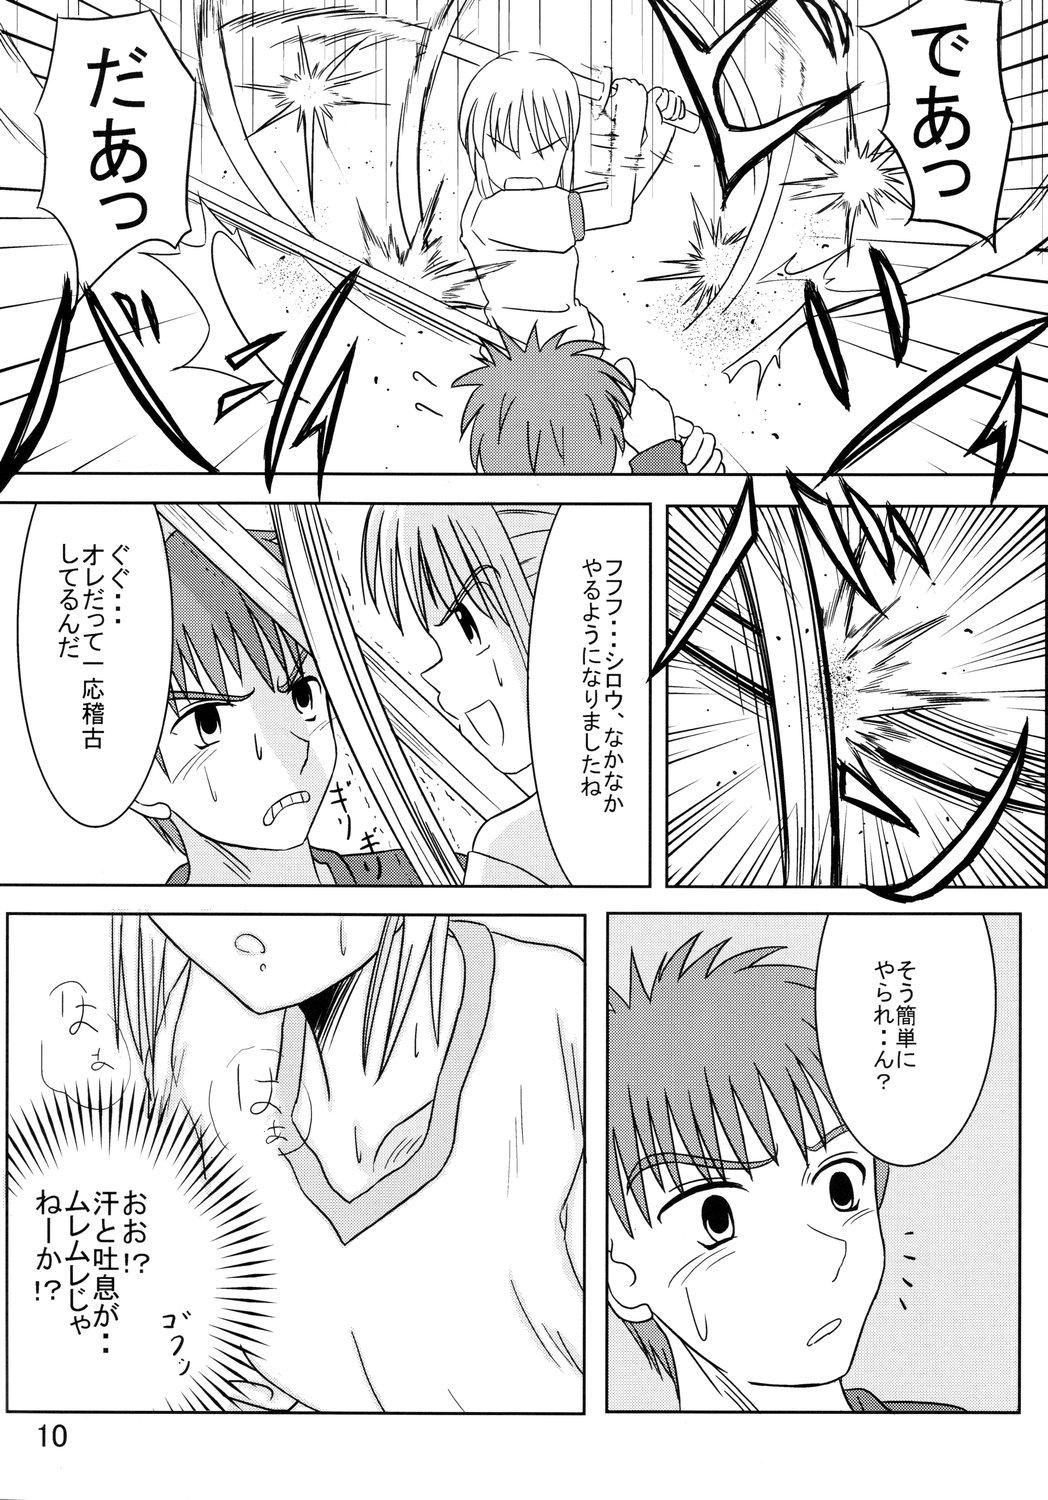 Cream Pie Saber Of Sanity - Fate stay night Lesbians - Page 9